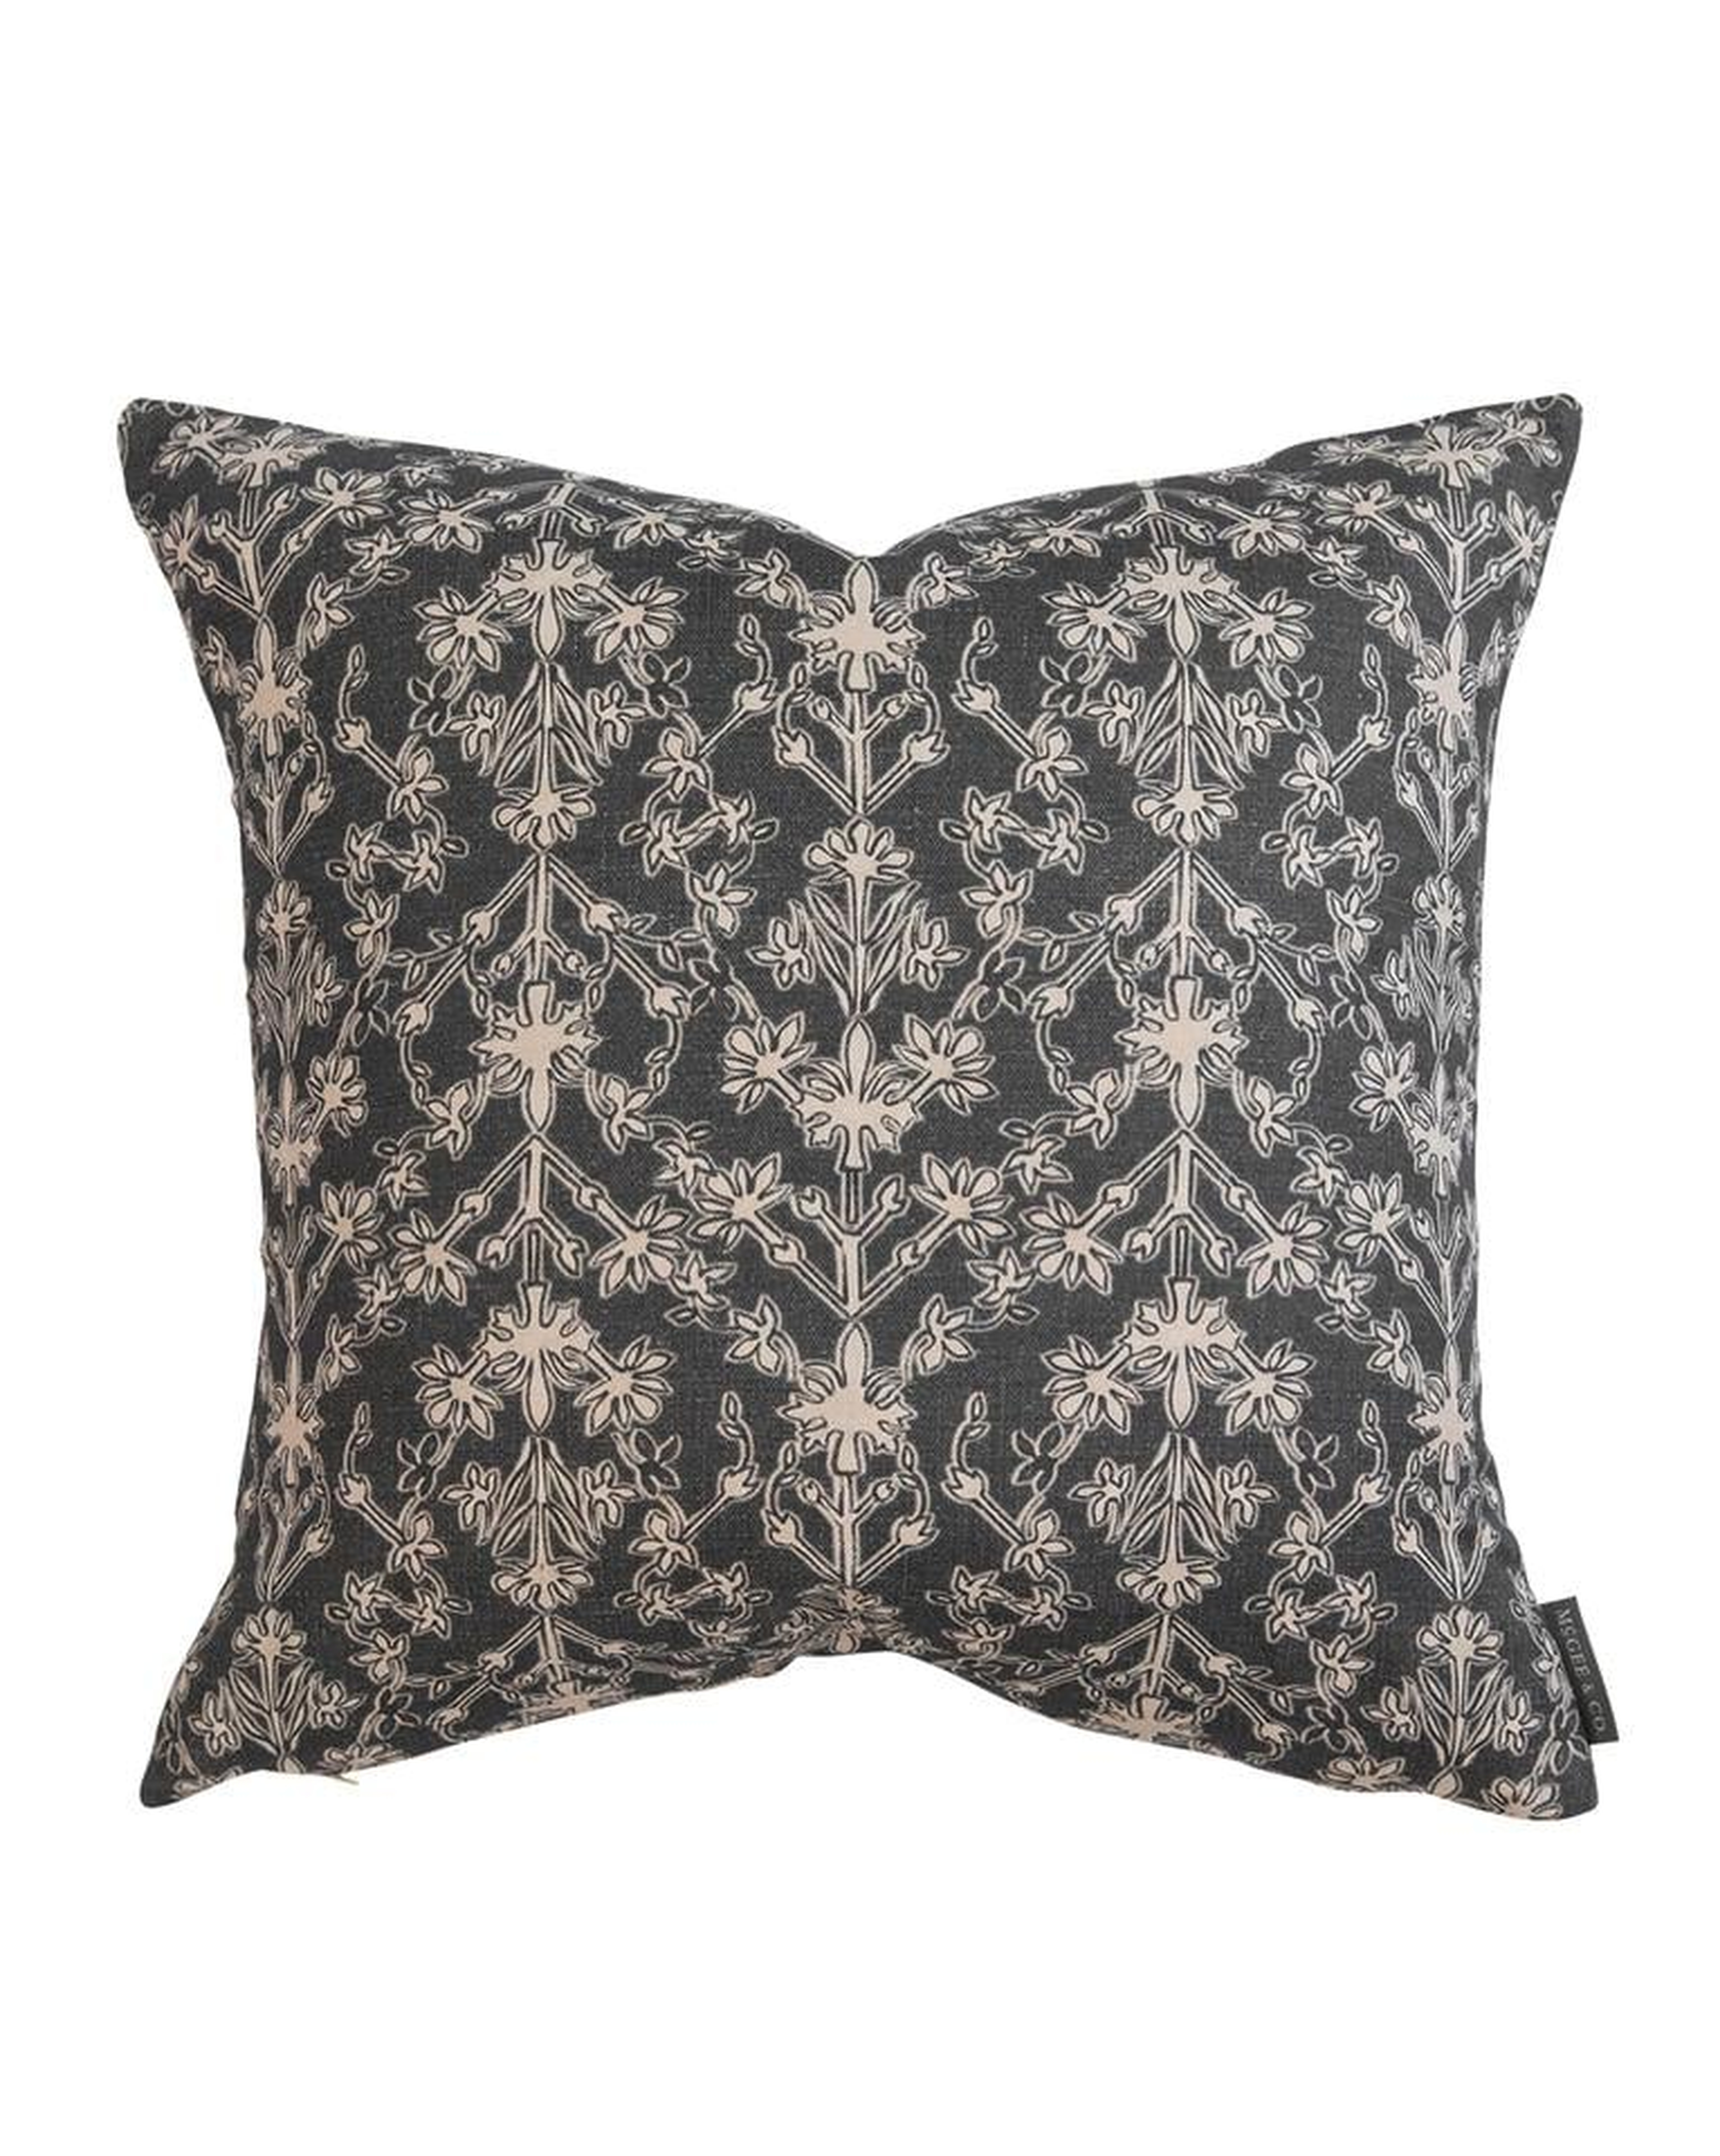 BAYLEE FLORAL PILLOW COVER 22" - McGee & Co.